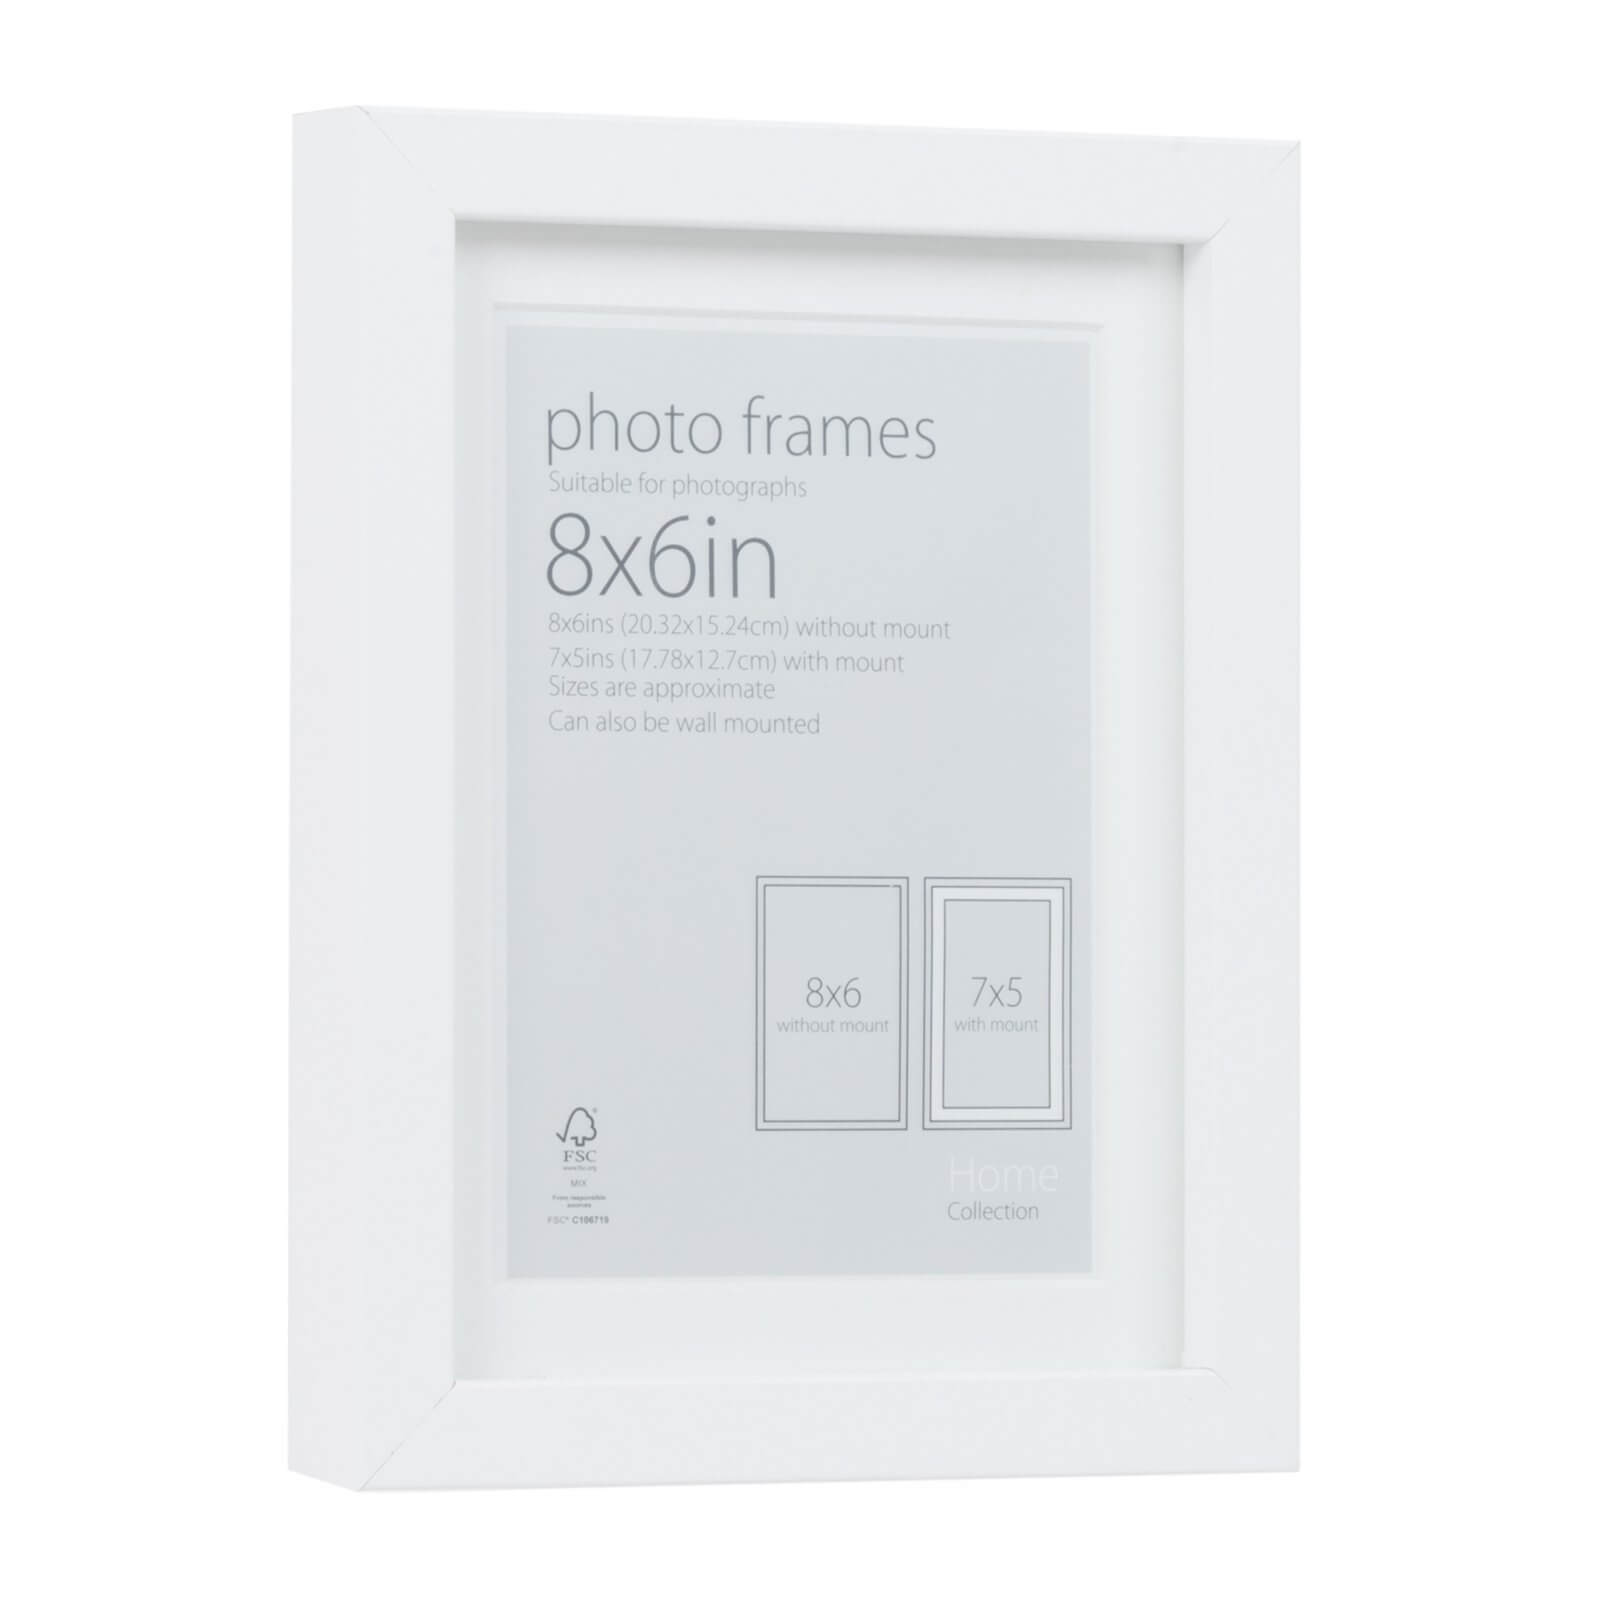 Photo Frame White 8 x 6 with 7 x 5 Mount Aperture